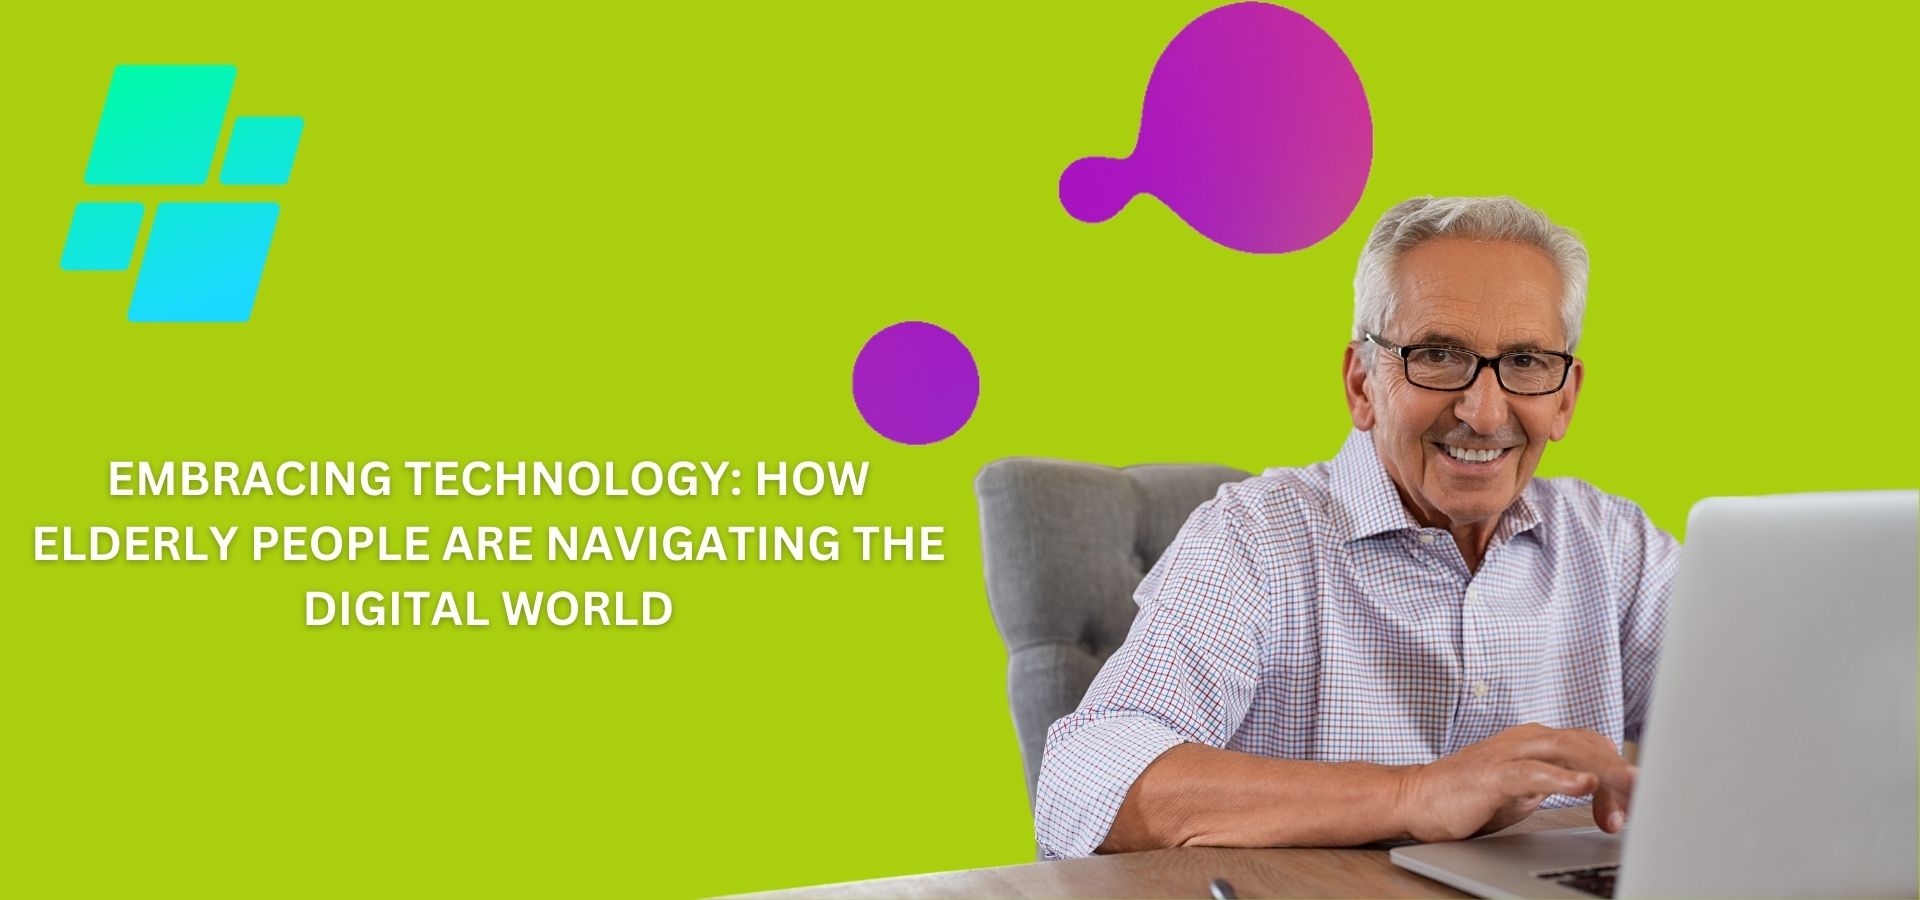 Embracing Technology: How Elderly People Are Navigating the Digital World